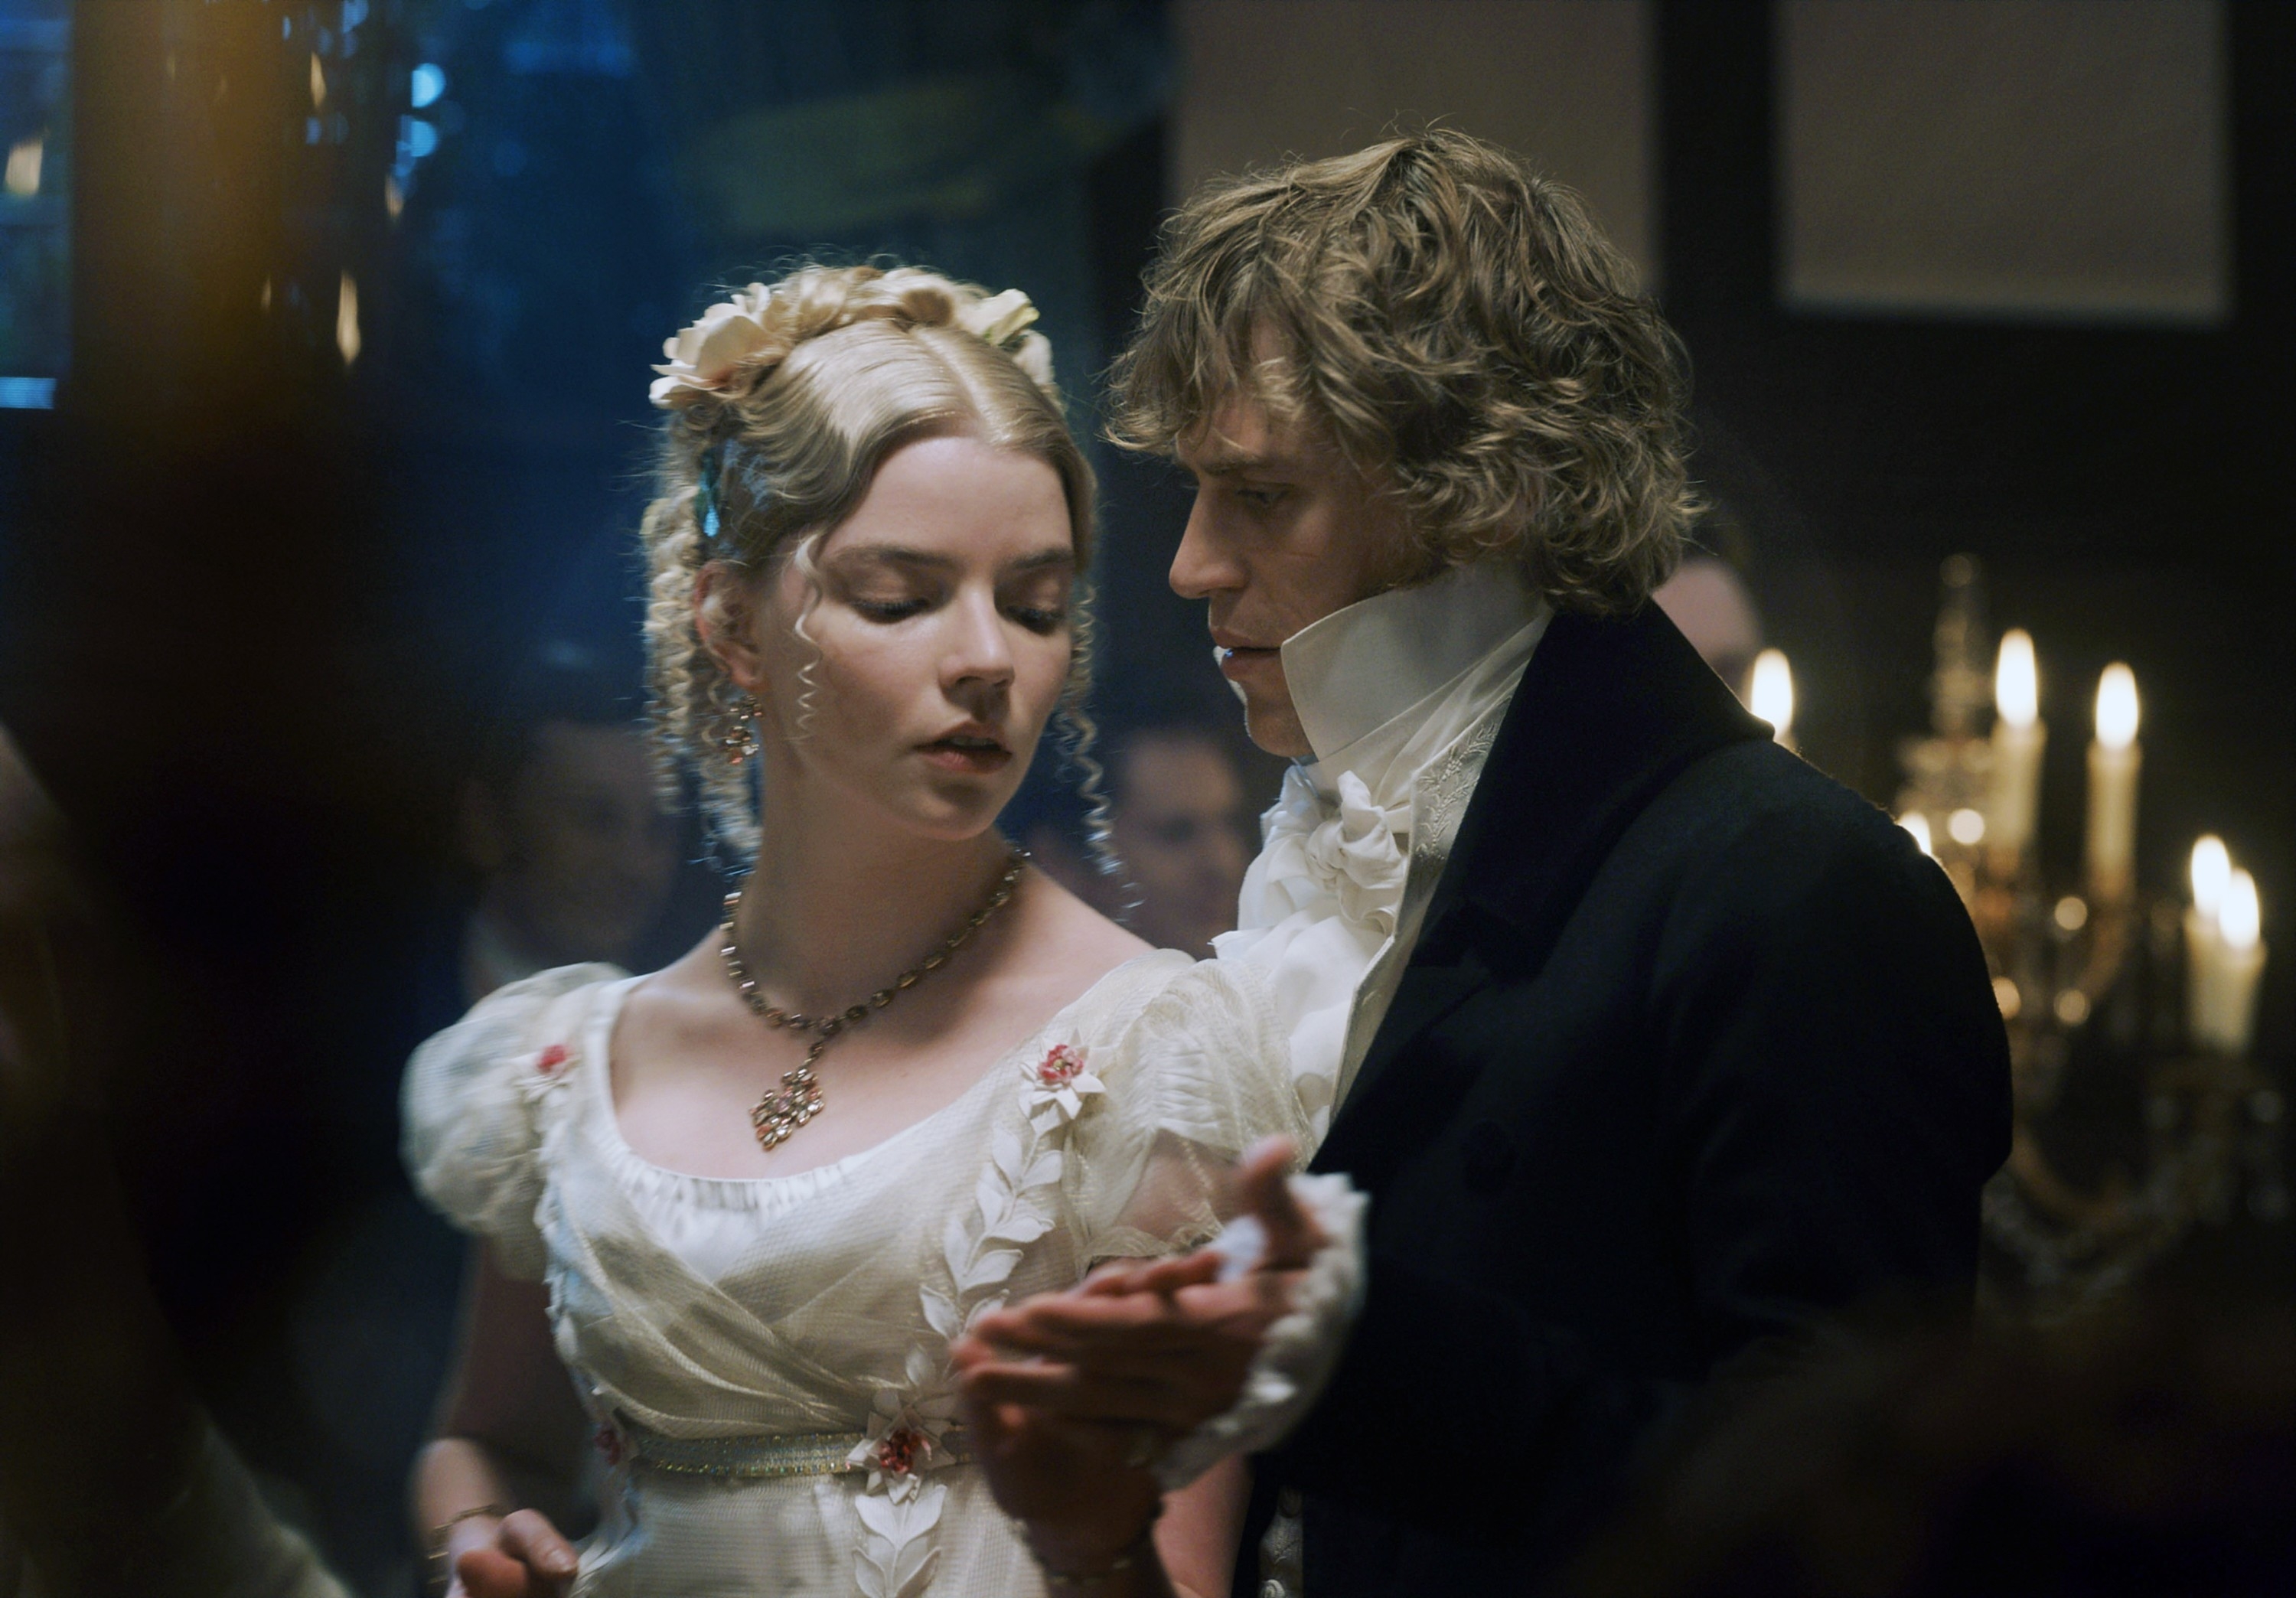 Two actors in historical costumes, as a well-dressed couple, engage in a dance